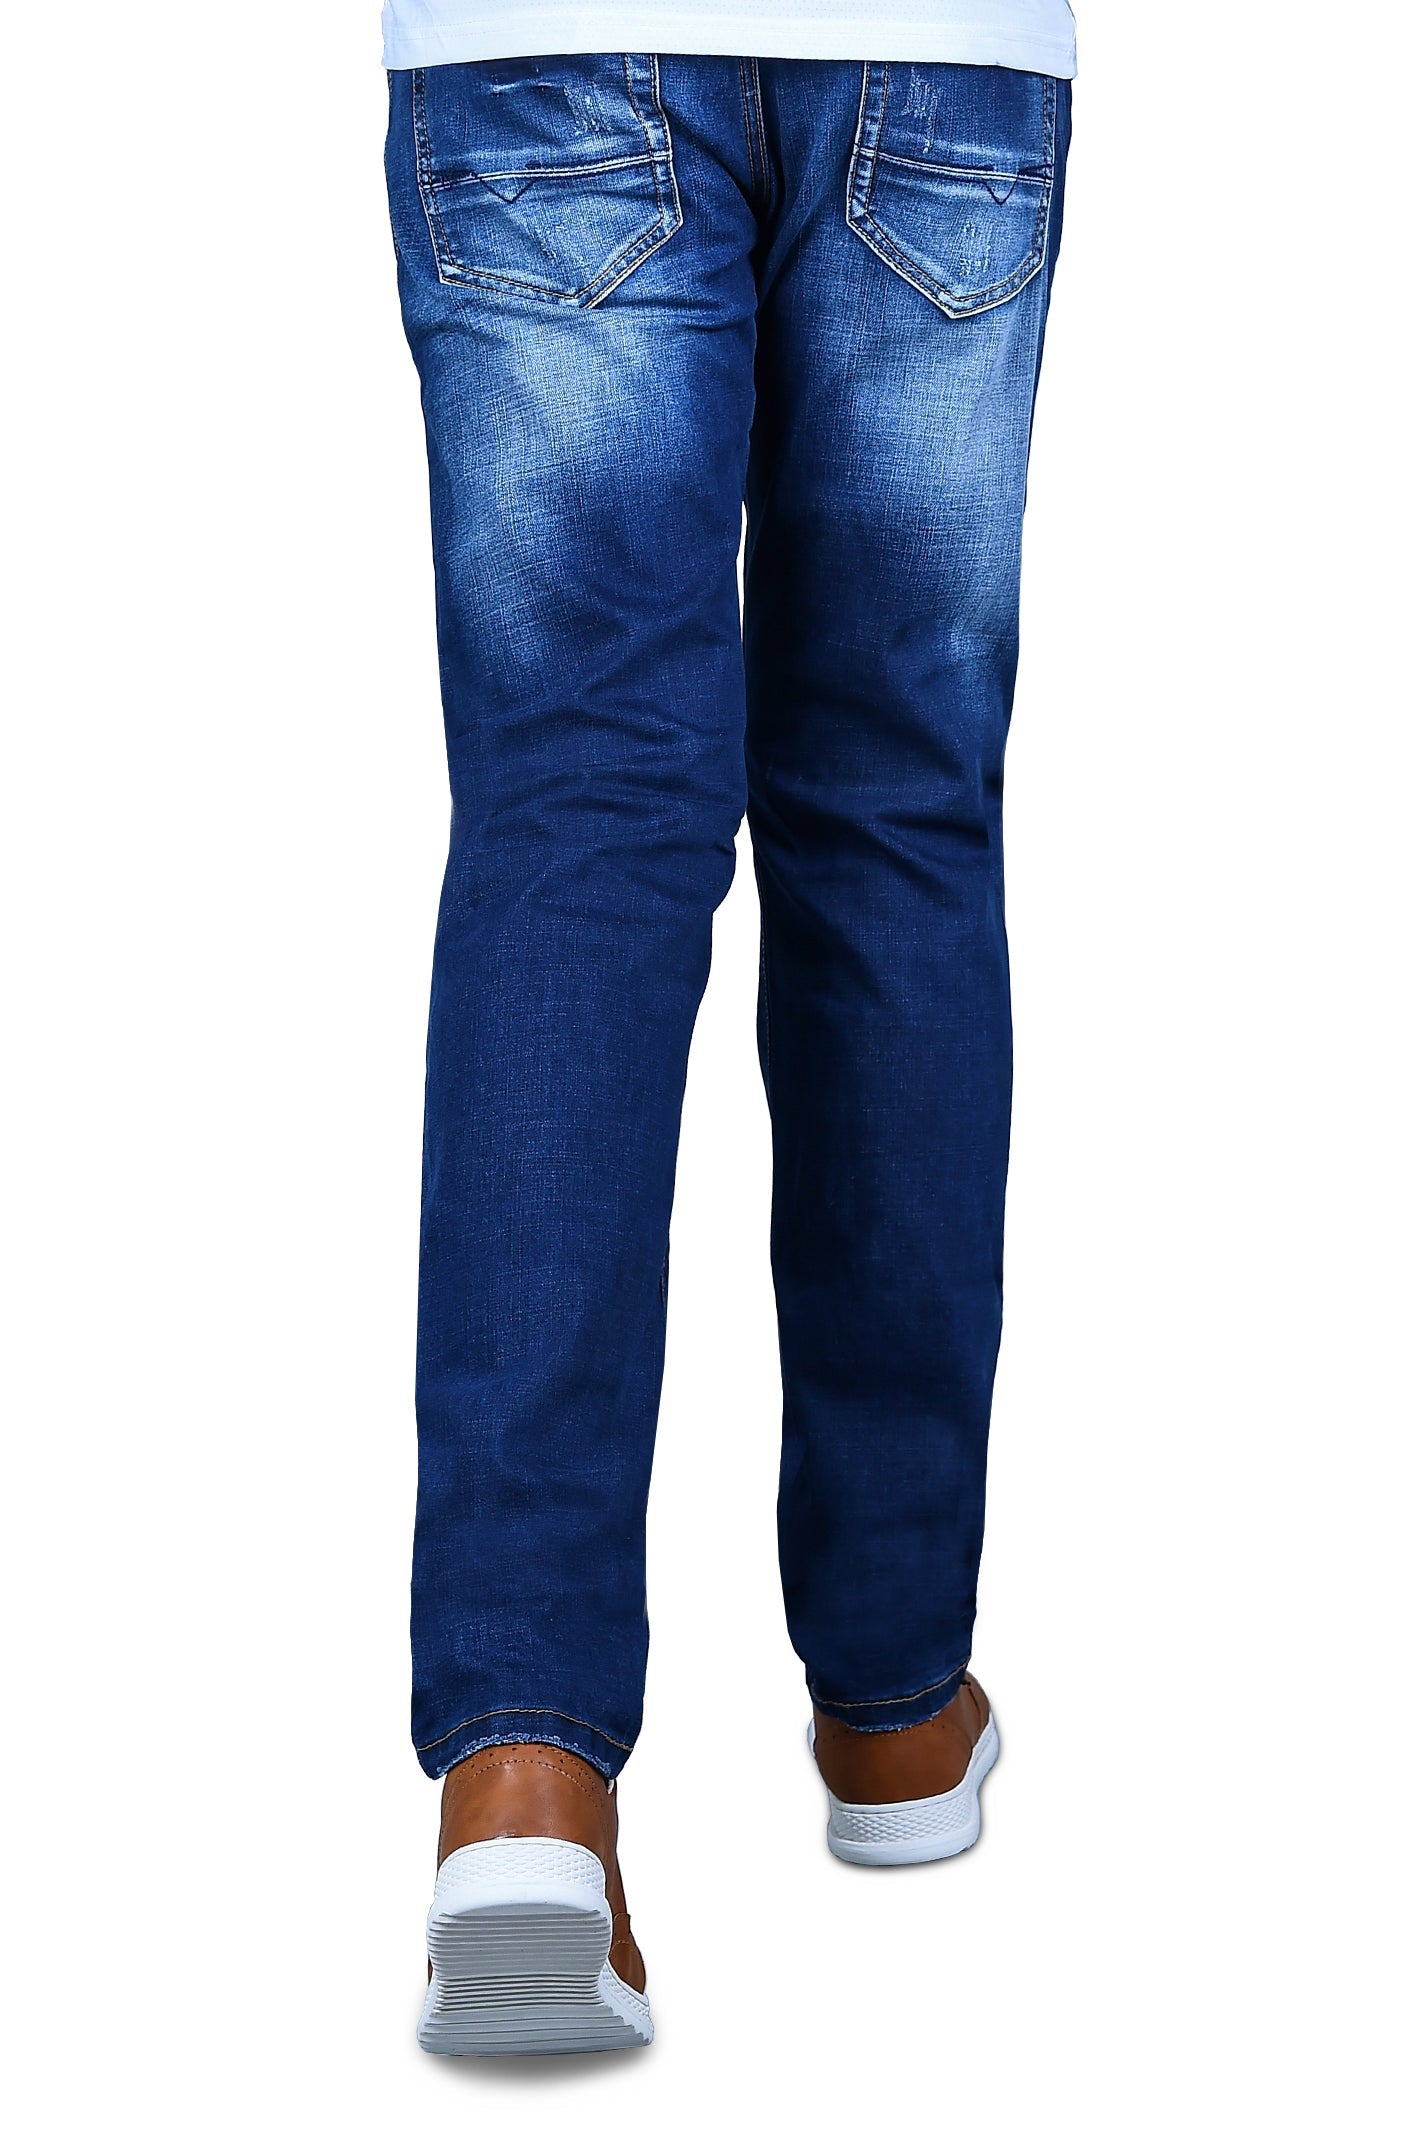 Casual Jeans in Blue SKU: BJ2719-BLUE - Diners